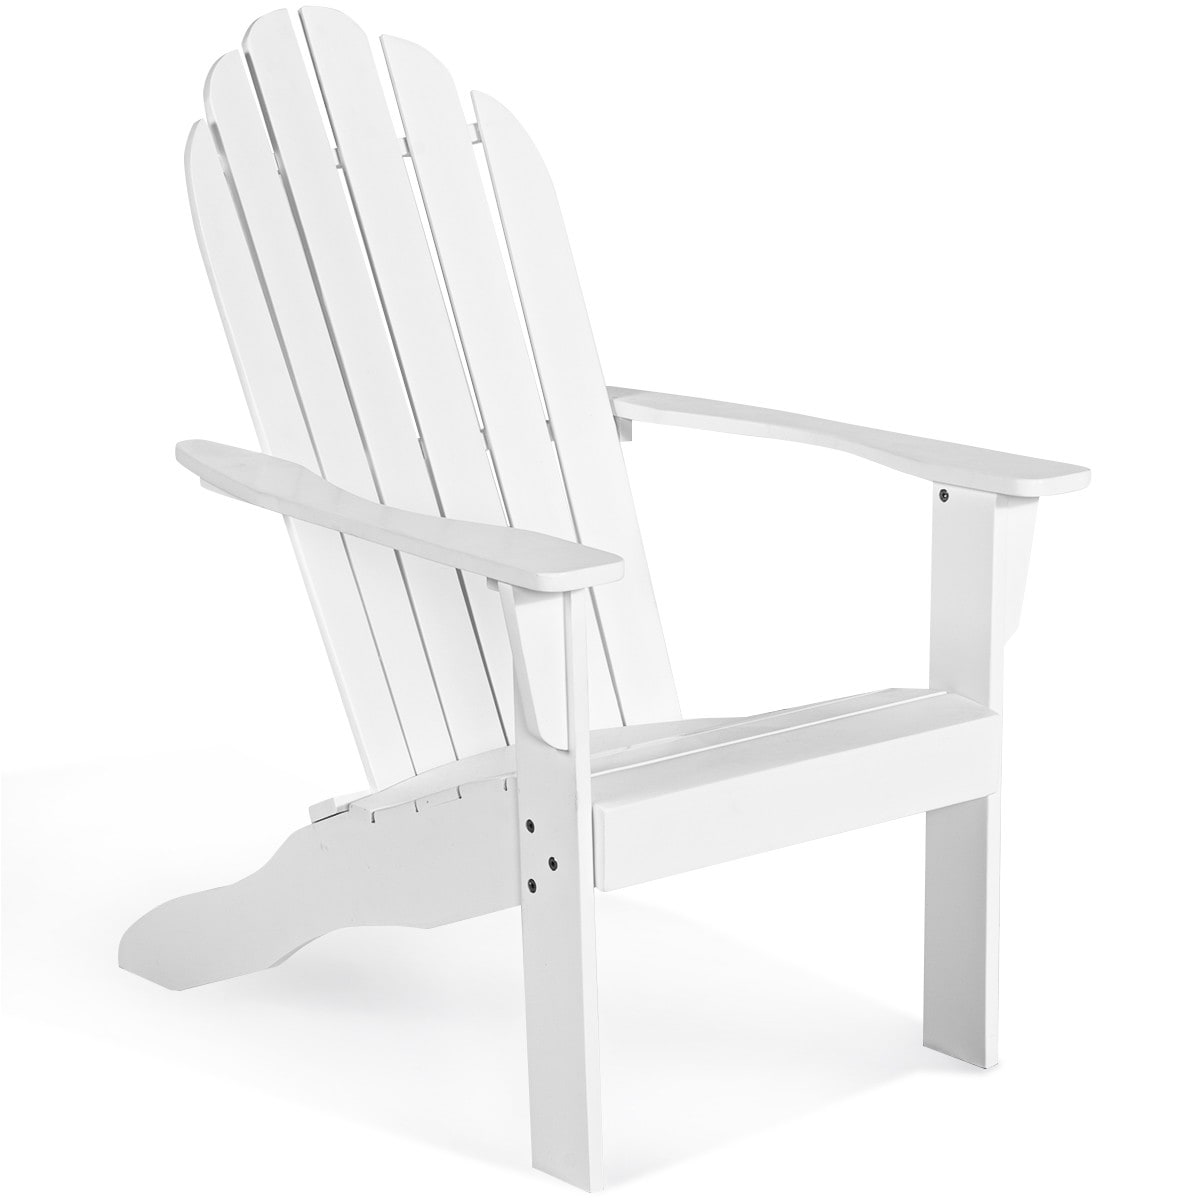 With Slat Seat In The Patio Chairs, Mainstays Outdoor Wood Adirondack Chair Black And White